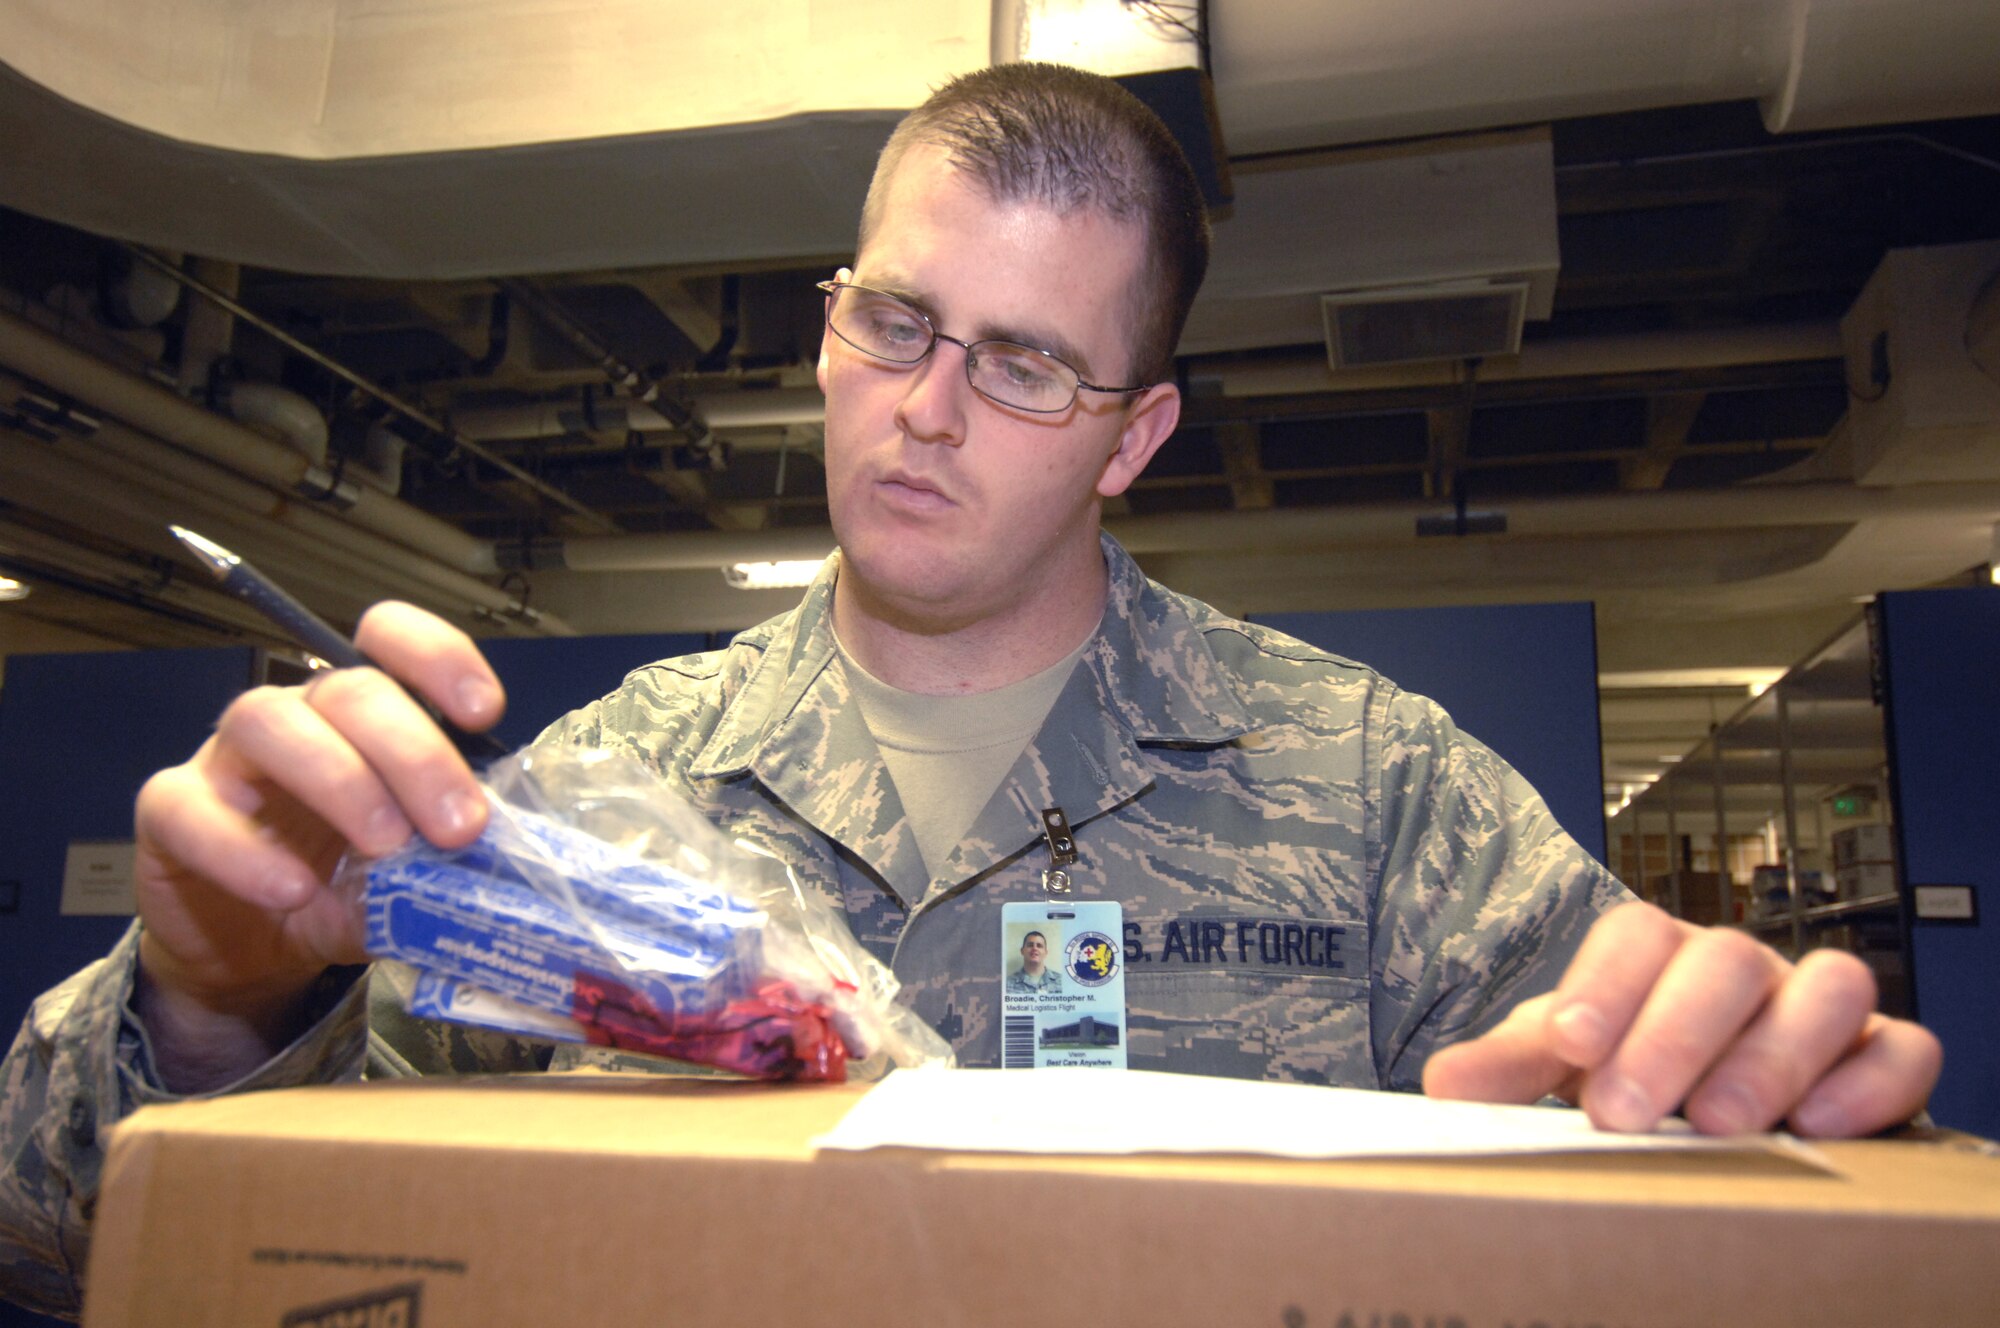 MINOT AIR FORCE BASE, N.D. -- Senior Airman Christopher Broadie, 5th Medical Group medical logistics materiel journeyman, catalogs various medical supplies delivered to the storage distribution center here Nov. 6. Medical Logistics receives miscellaneous medical supplies, including those involving dental, physical therapy and laboratory work.  Airman Broadie was recognized as an outstanding performer during the 5th MDG’s recent Air Force Inspection Agency Health Services Inspection. The medical group was rated an outstanding in eight of the 16 major graded areas and captured an overall excellent rating for the HSI. (U.S. Air Force photo by Airman 1st Class Jesse Lopez)